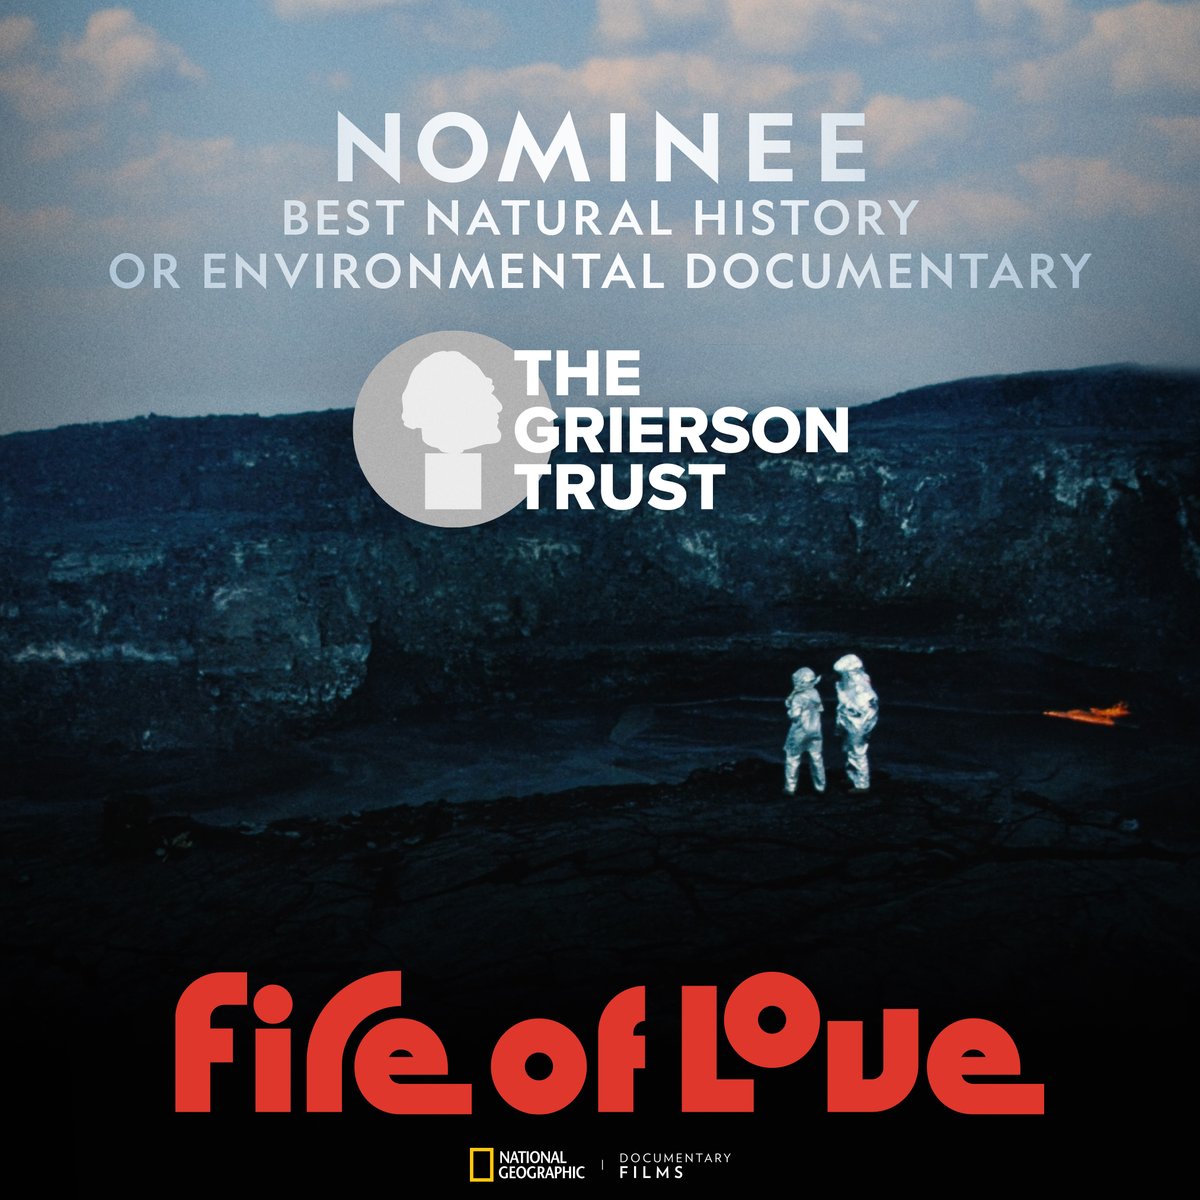 Congratulations to #FireofLove, Best Natural History or Environmental Documentary nominee at the #GriersonAwards for its explosive and emotive love story about volcanologists Katia and Maurice Krafft!